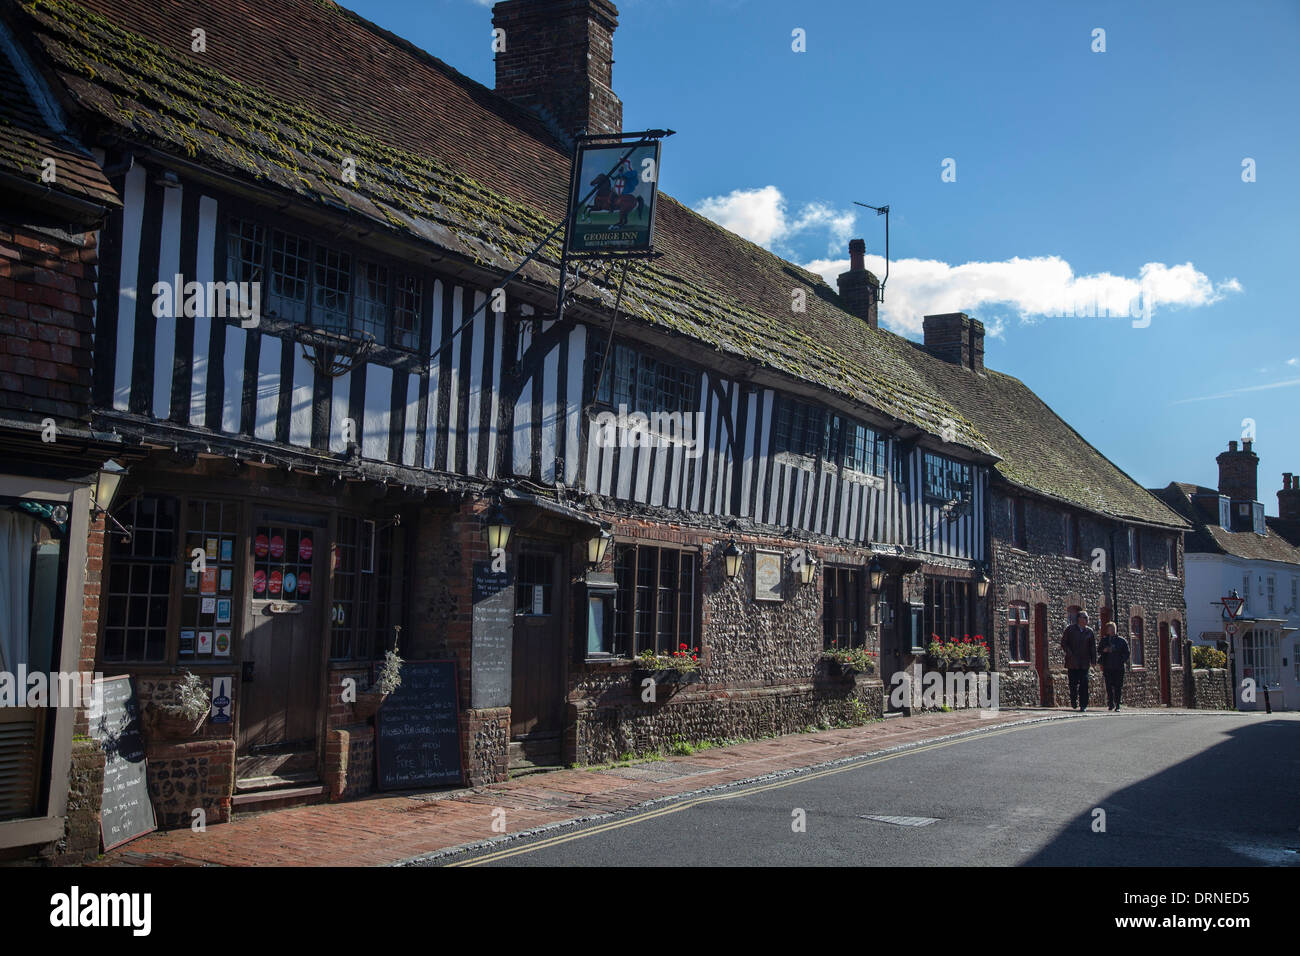 The George Inn dates from the 14th century, Alfriston village, County Sussex, England. Stock Photo